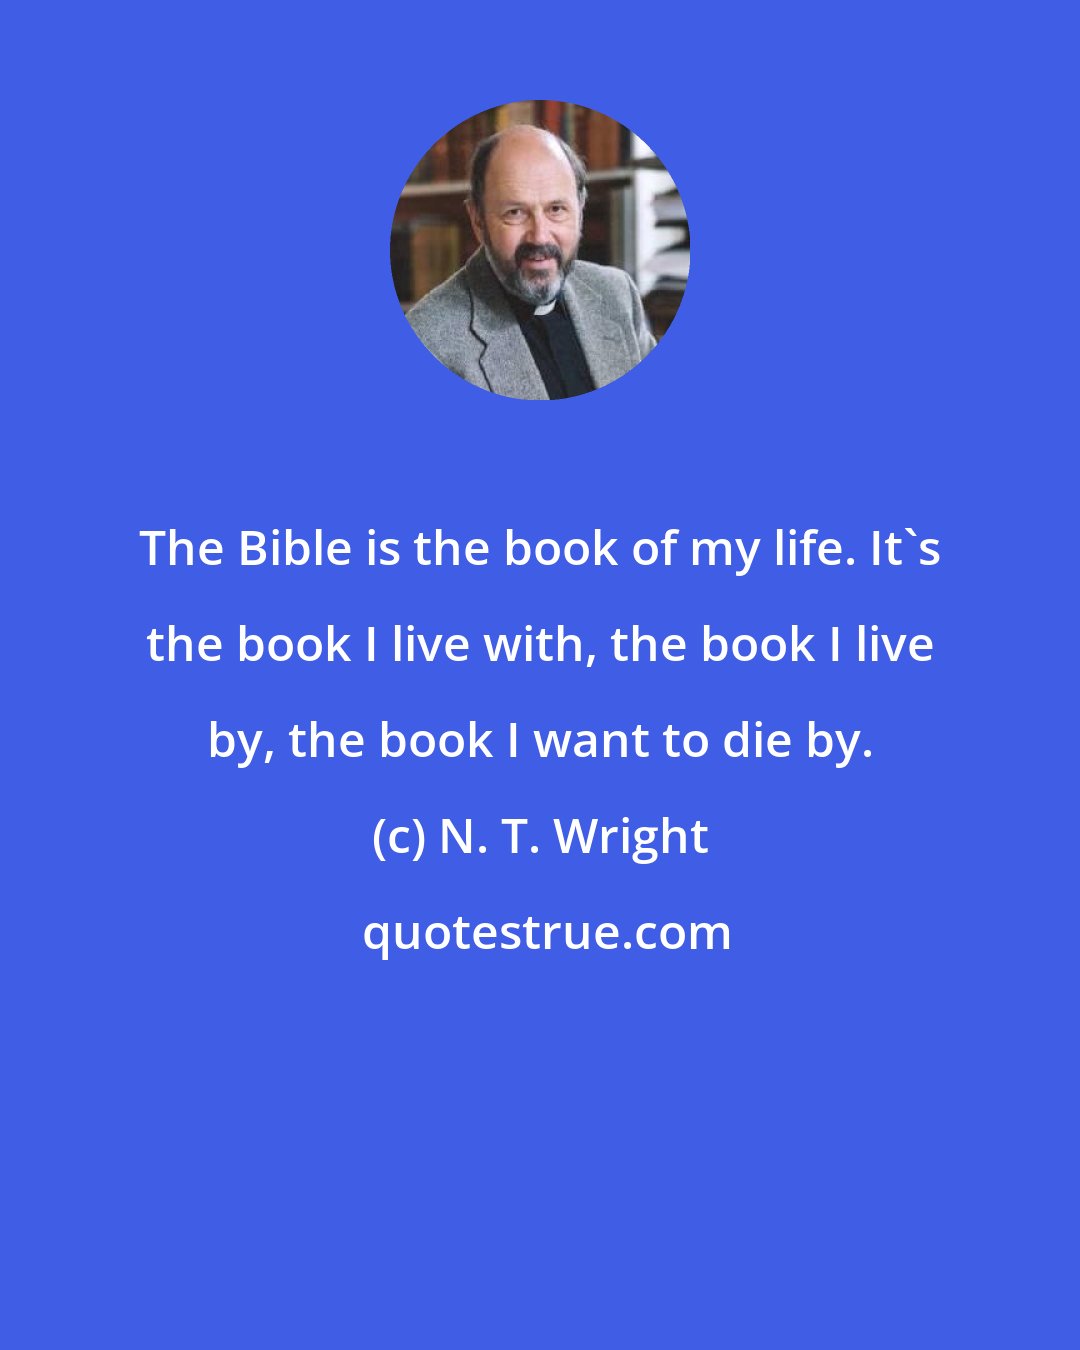 N. T. Wright: The Bible is the book of my life. It's the book I live with, the book I live by, the book I want to die by.